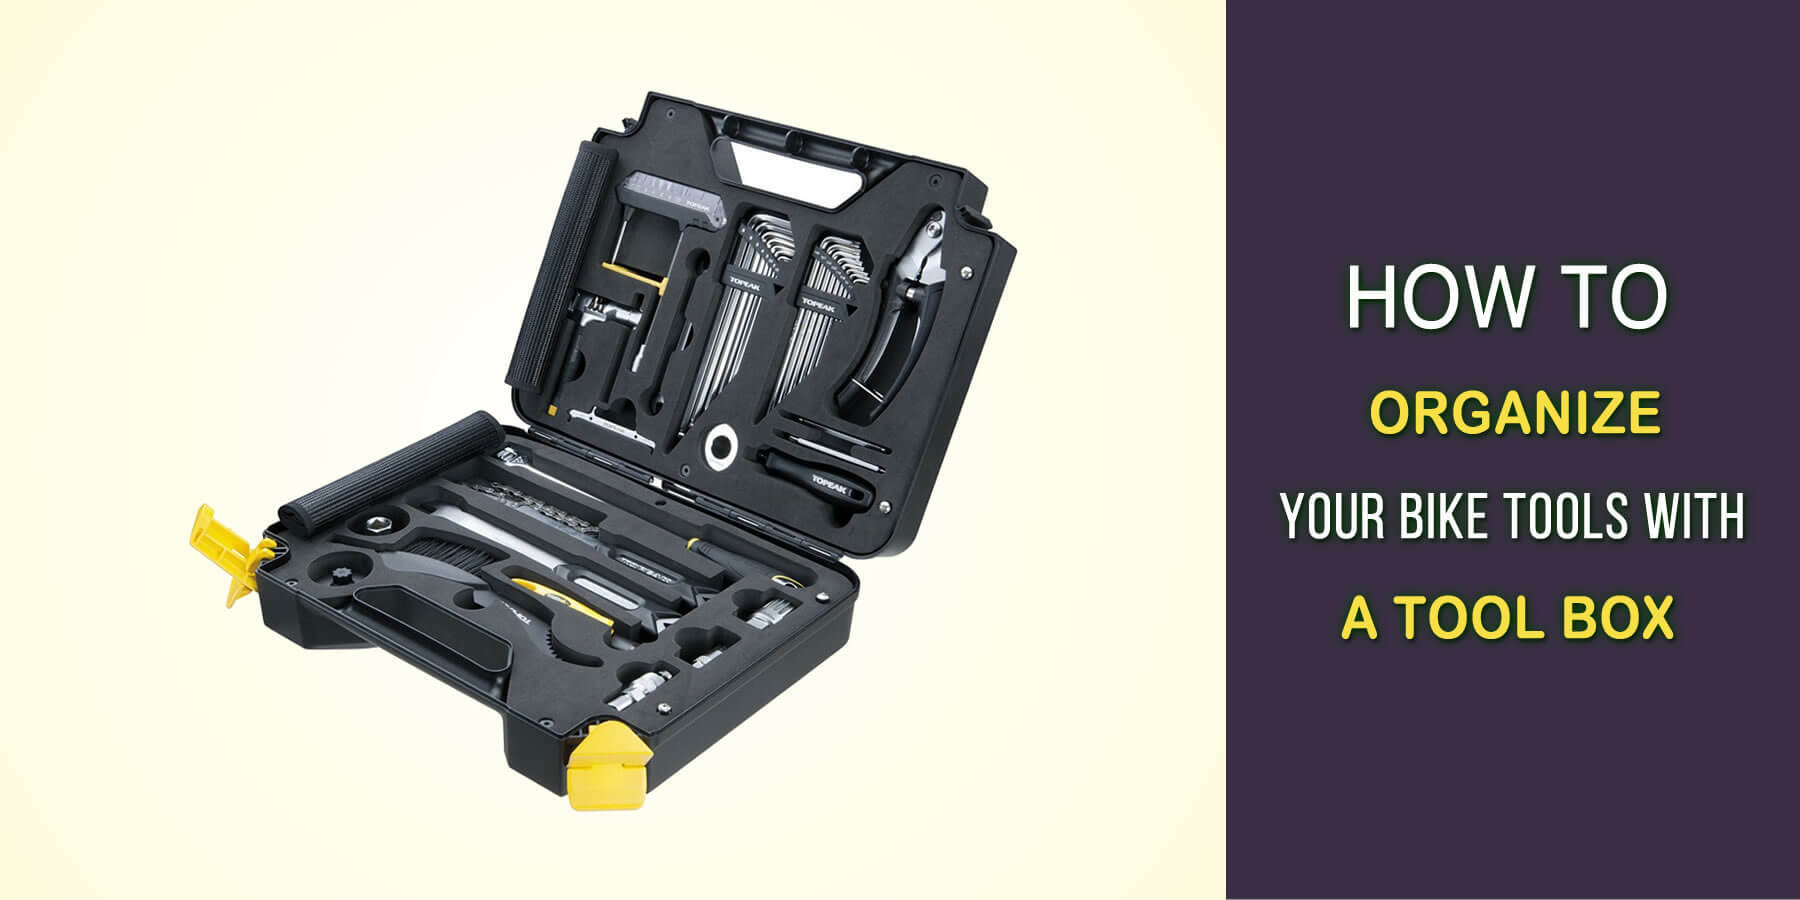 How To Organize Your Bike Tools With A Tool Box